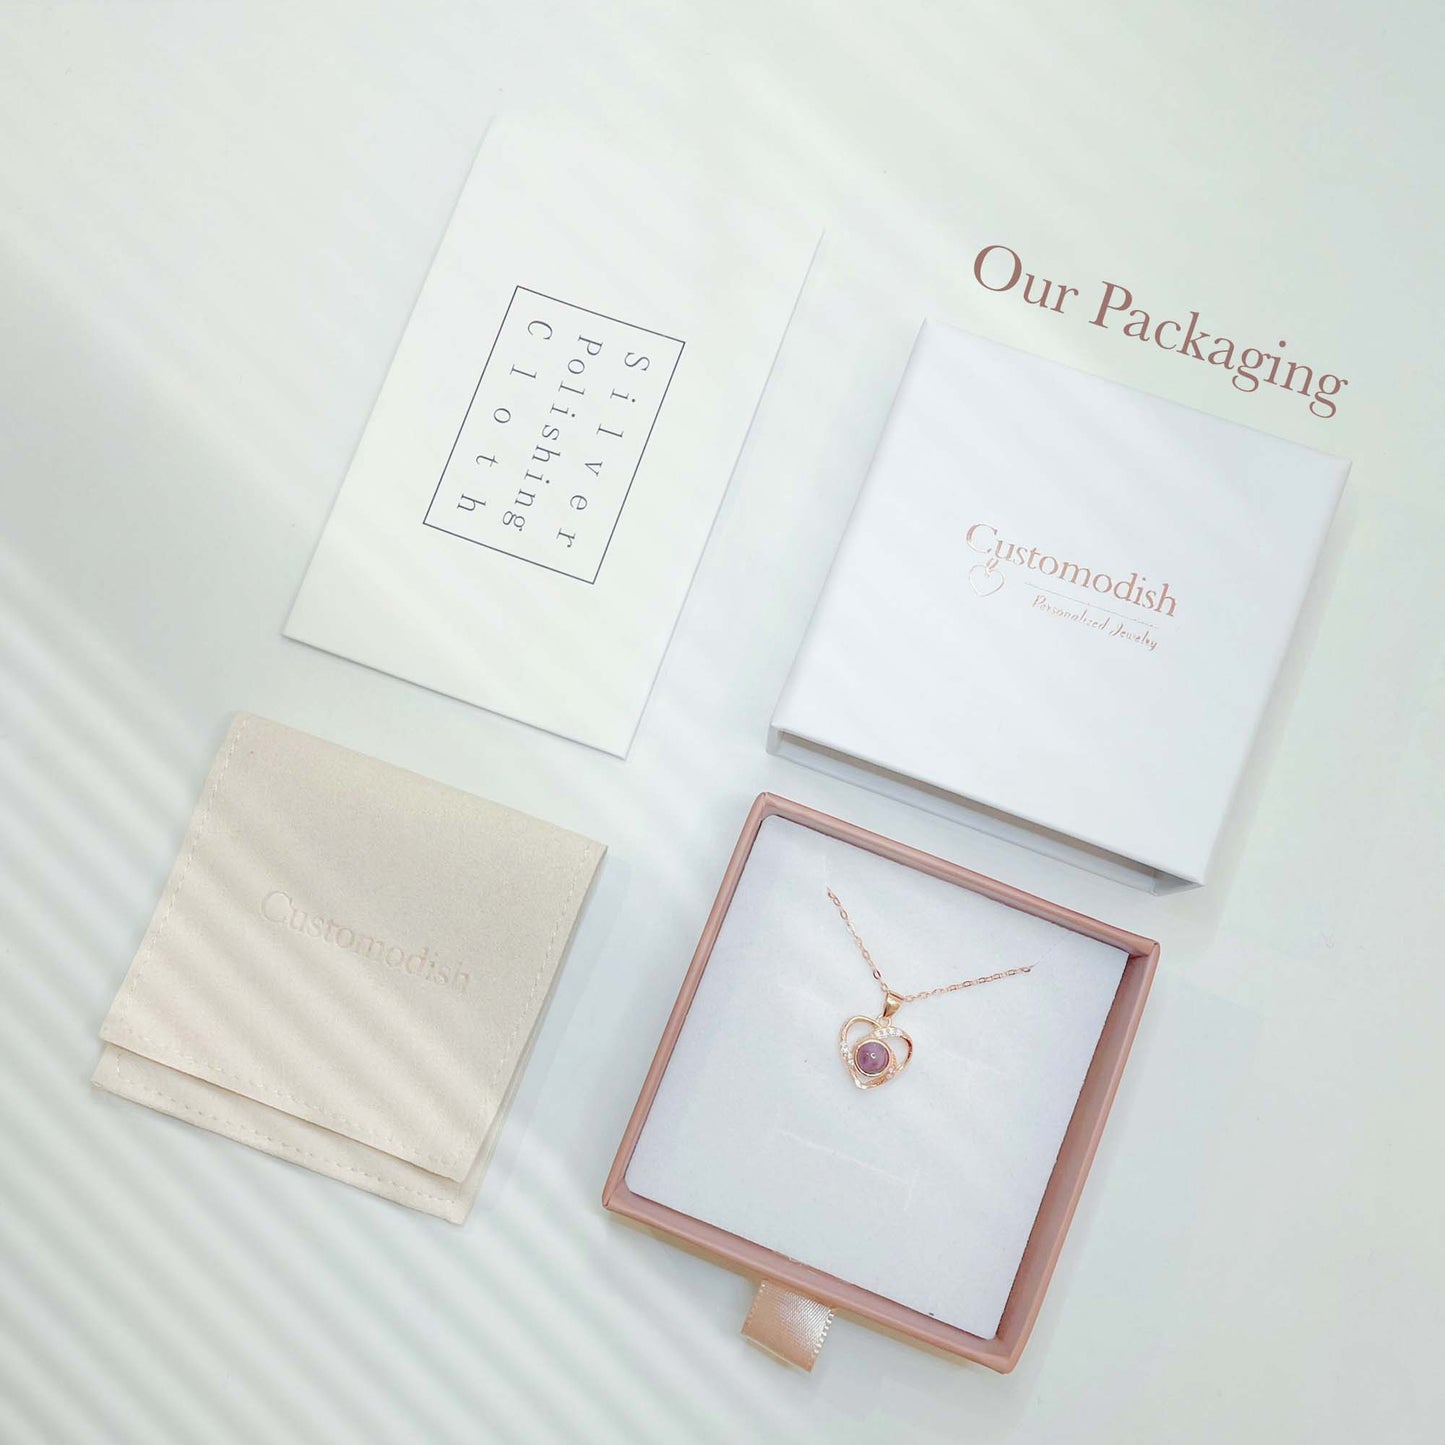 Customodish's projection necklaces are great gifts with beautiful packaging!